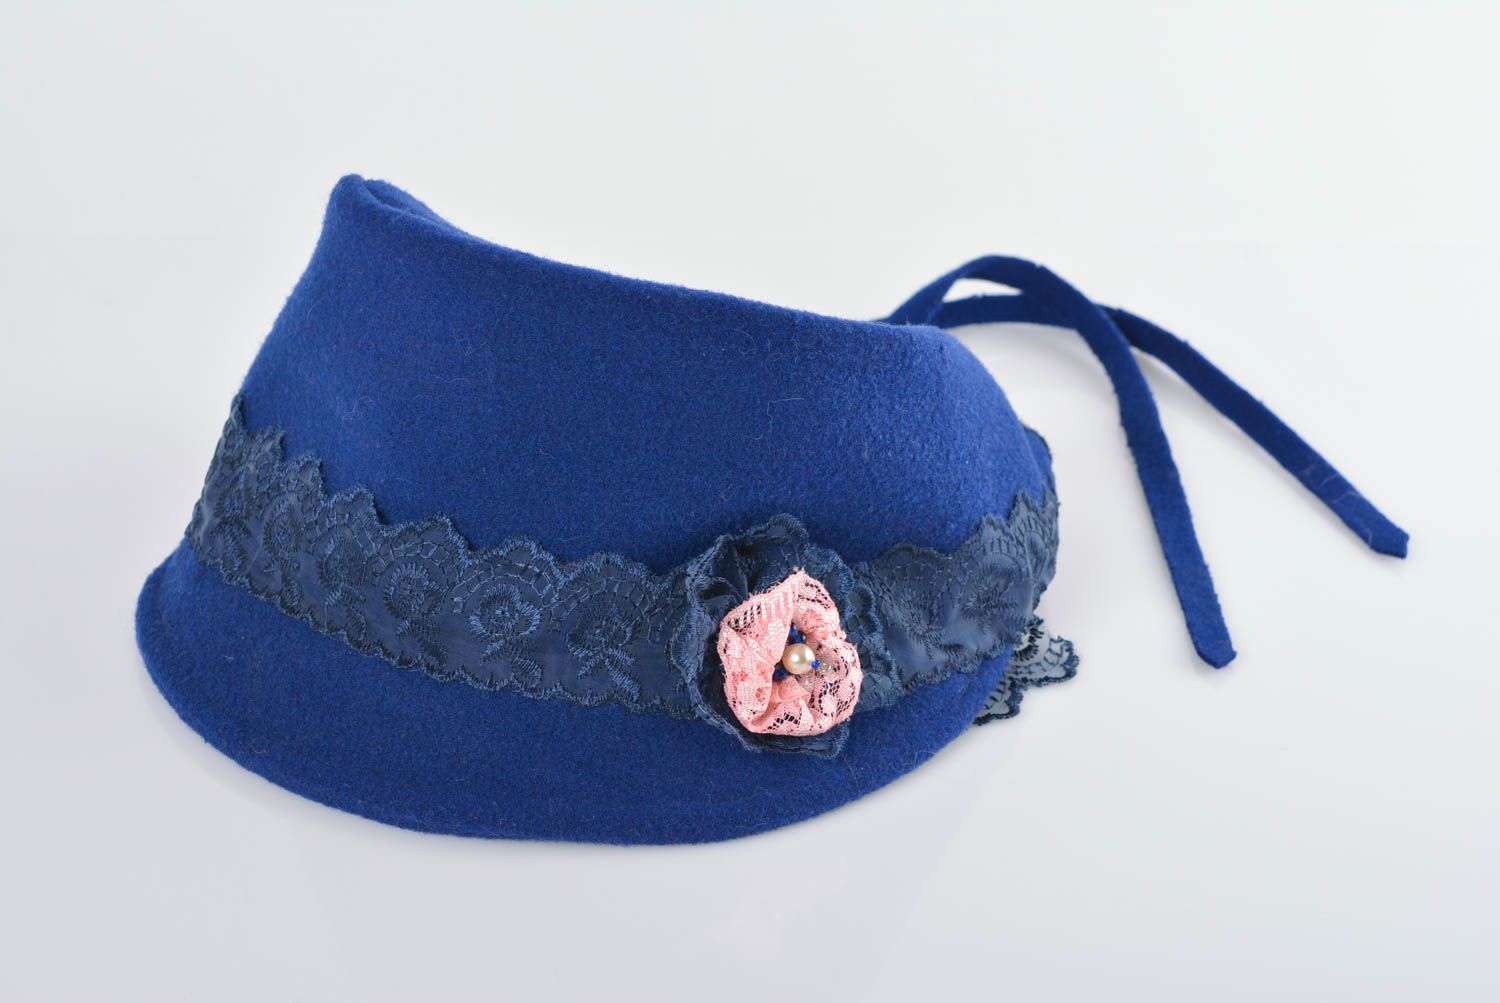 Unusual women's hat with blue satin lining with lace handmade headware photo 1